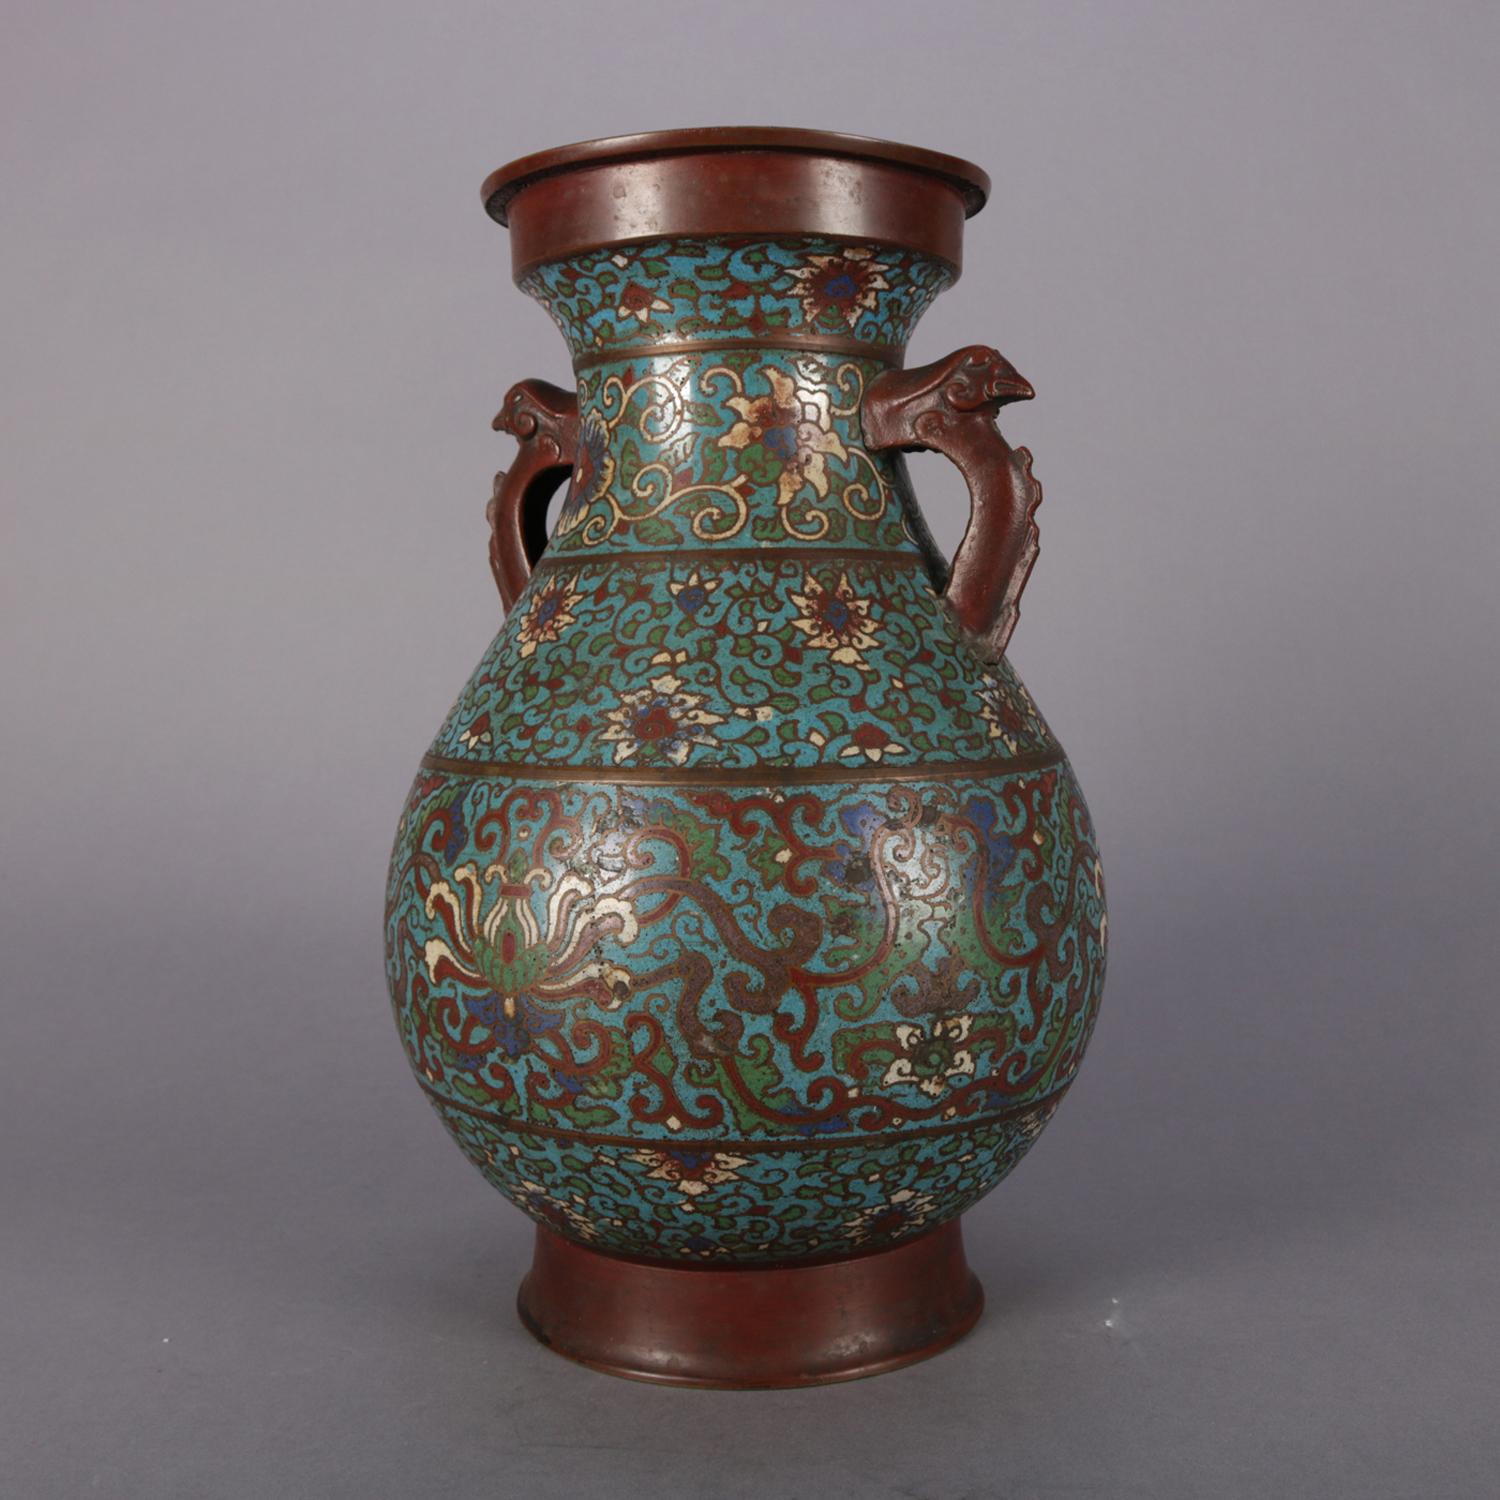 Enameled Antique Chinese Cloisonne Enamel Bronze Floral and Scroll Double Handle Urn